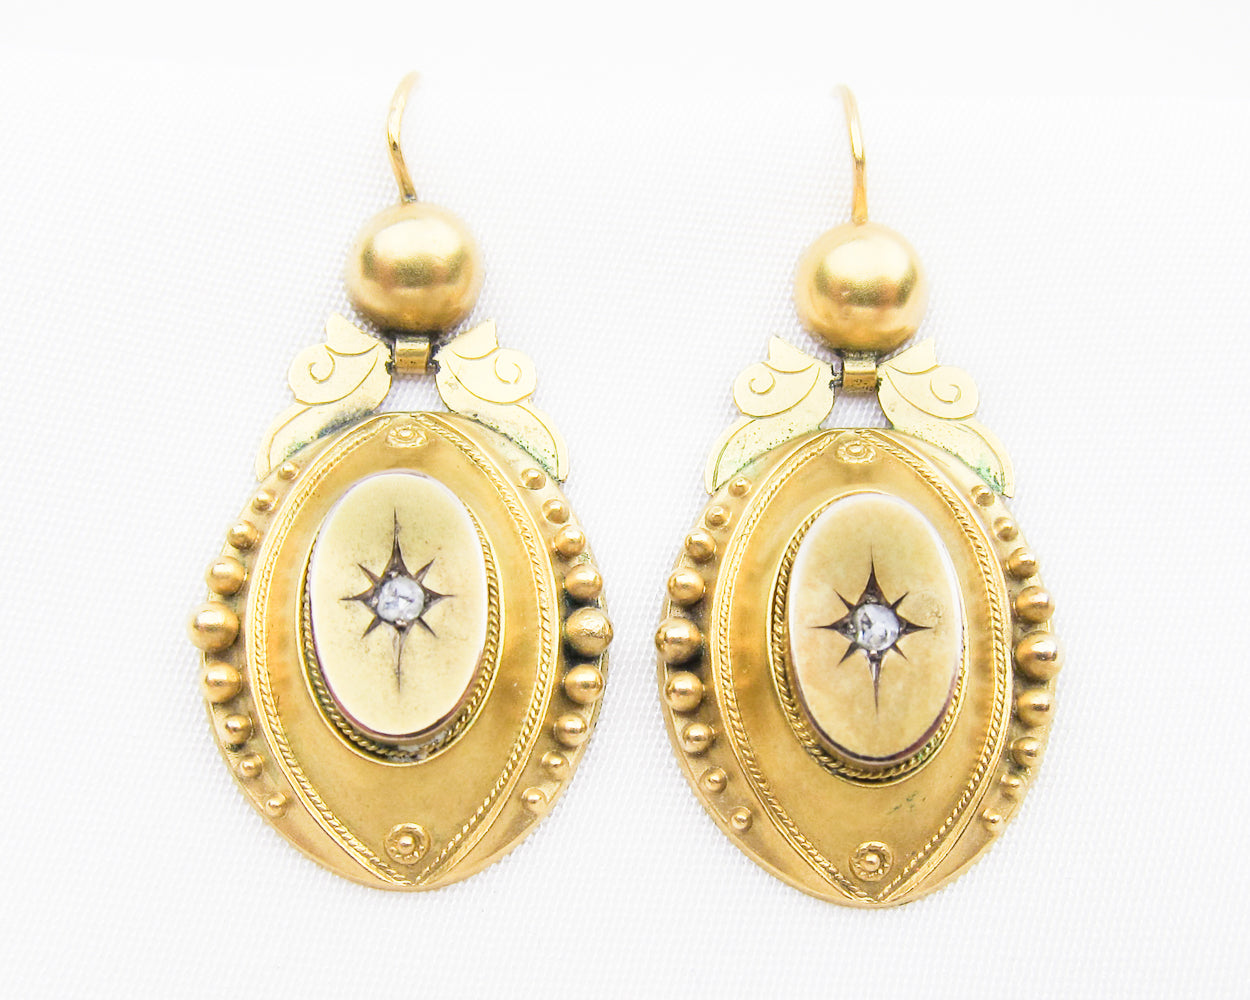 Victorian Etruscan Revival Earrings with Diamond Accents